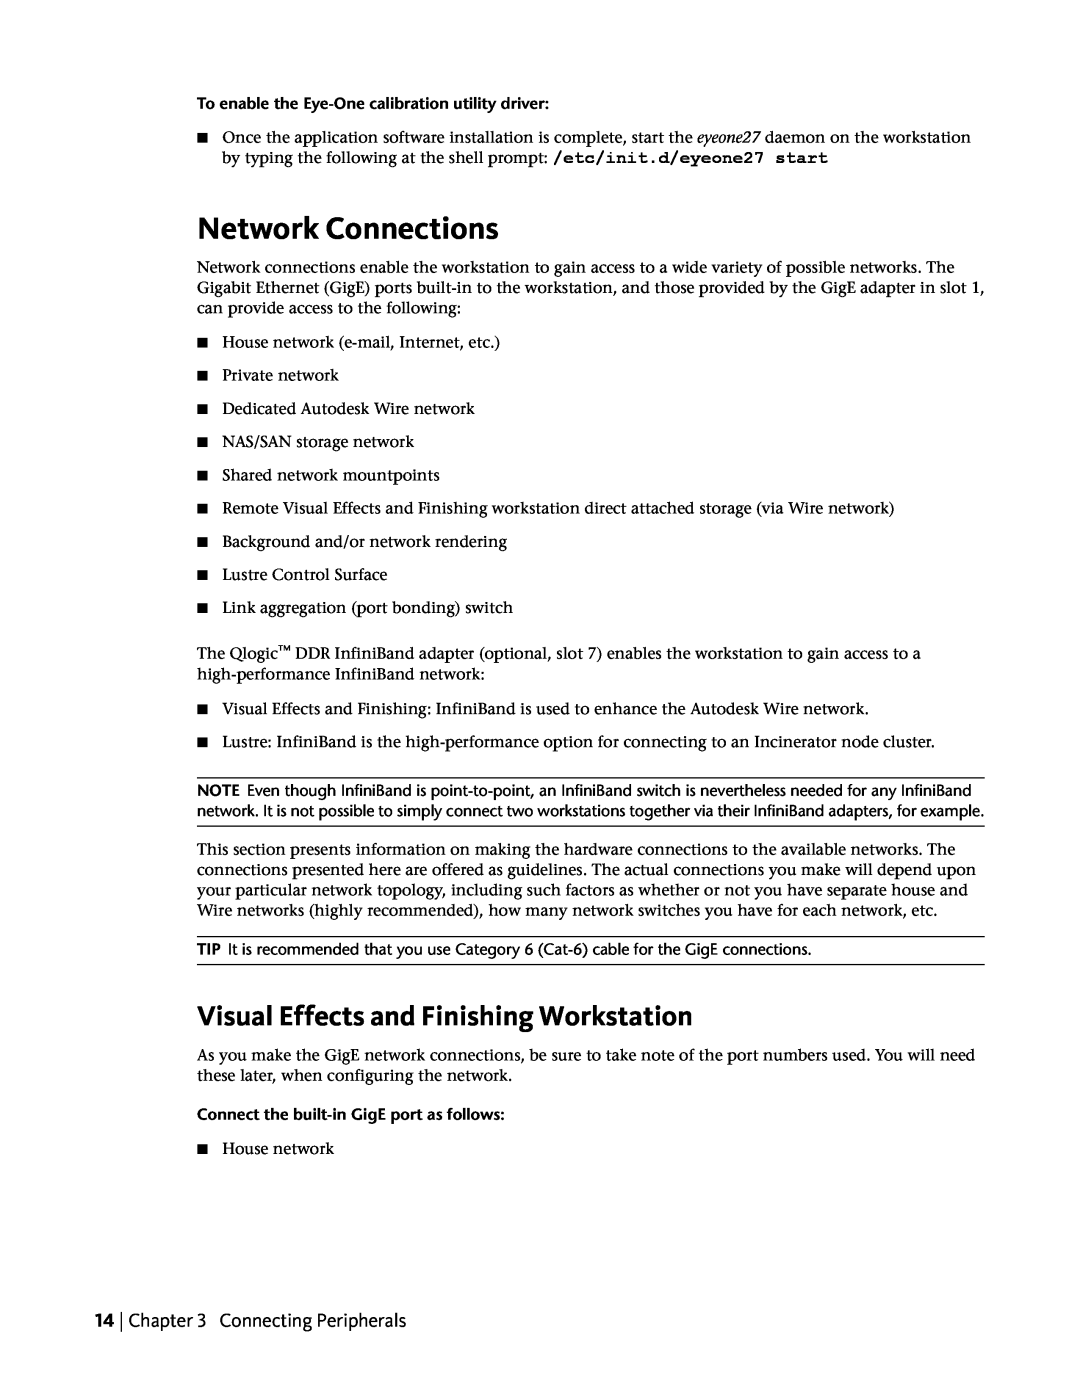 HP Z800 manual Network Connections, Visual Effects and Finishing Workstation, Connecting Peripherals 